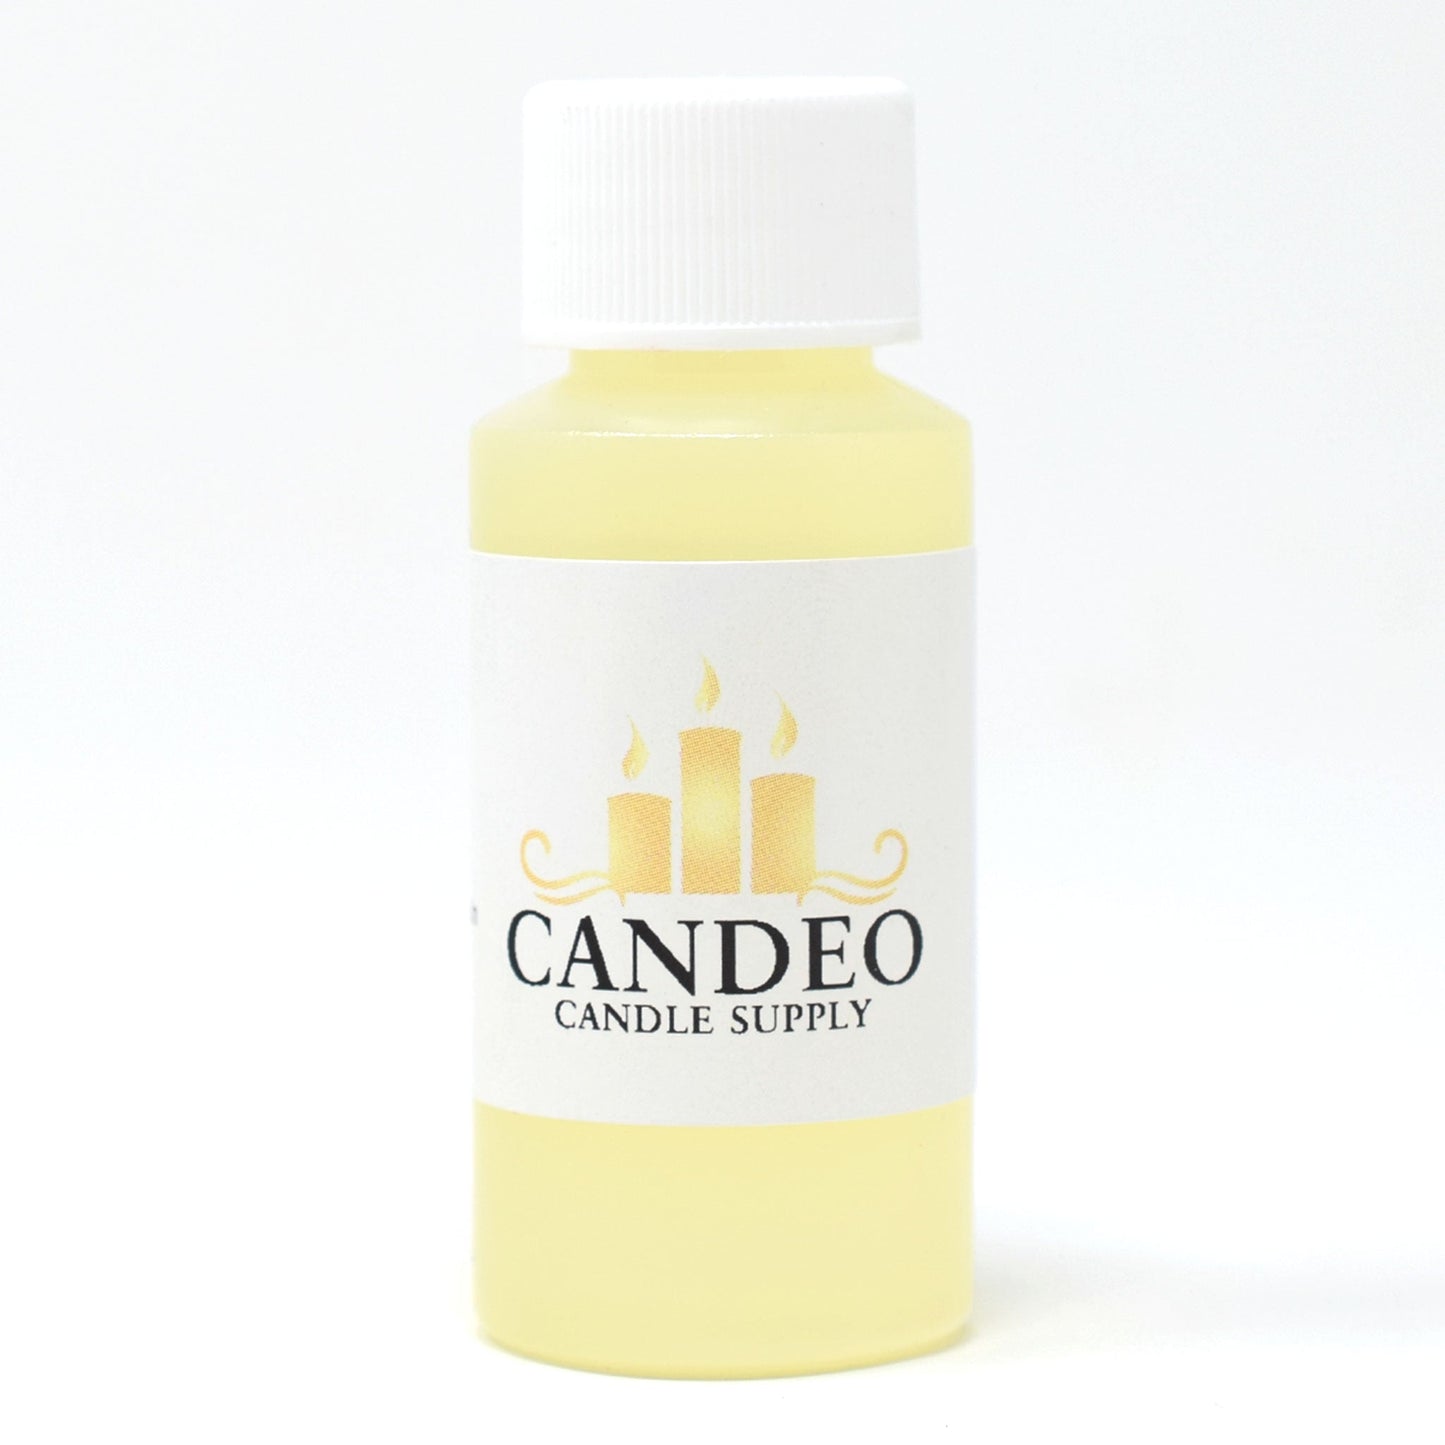 Campfire Smoke Fragrance Oil - Candeo Candle Supply